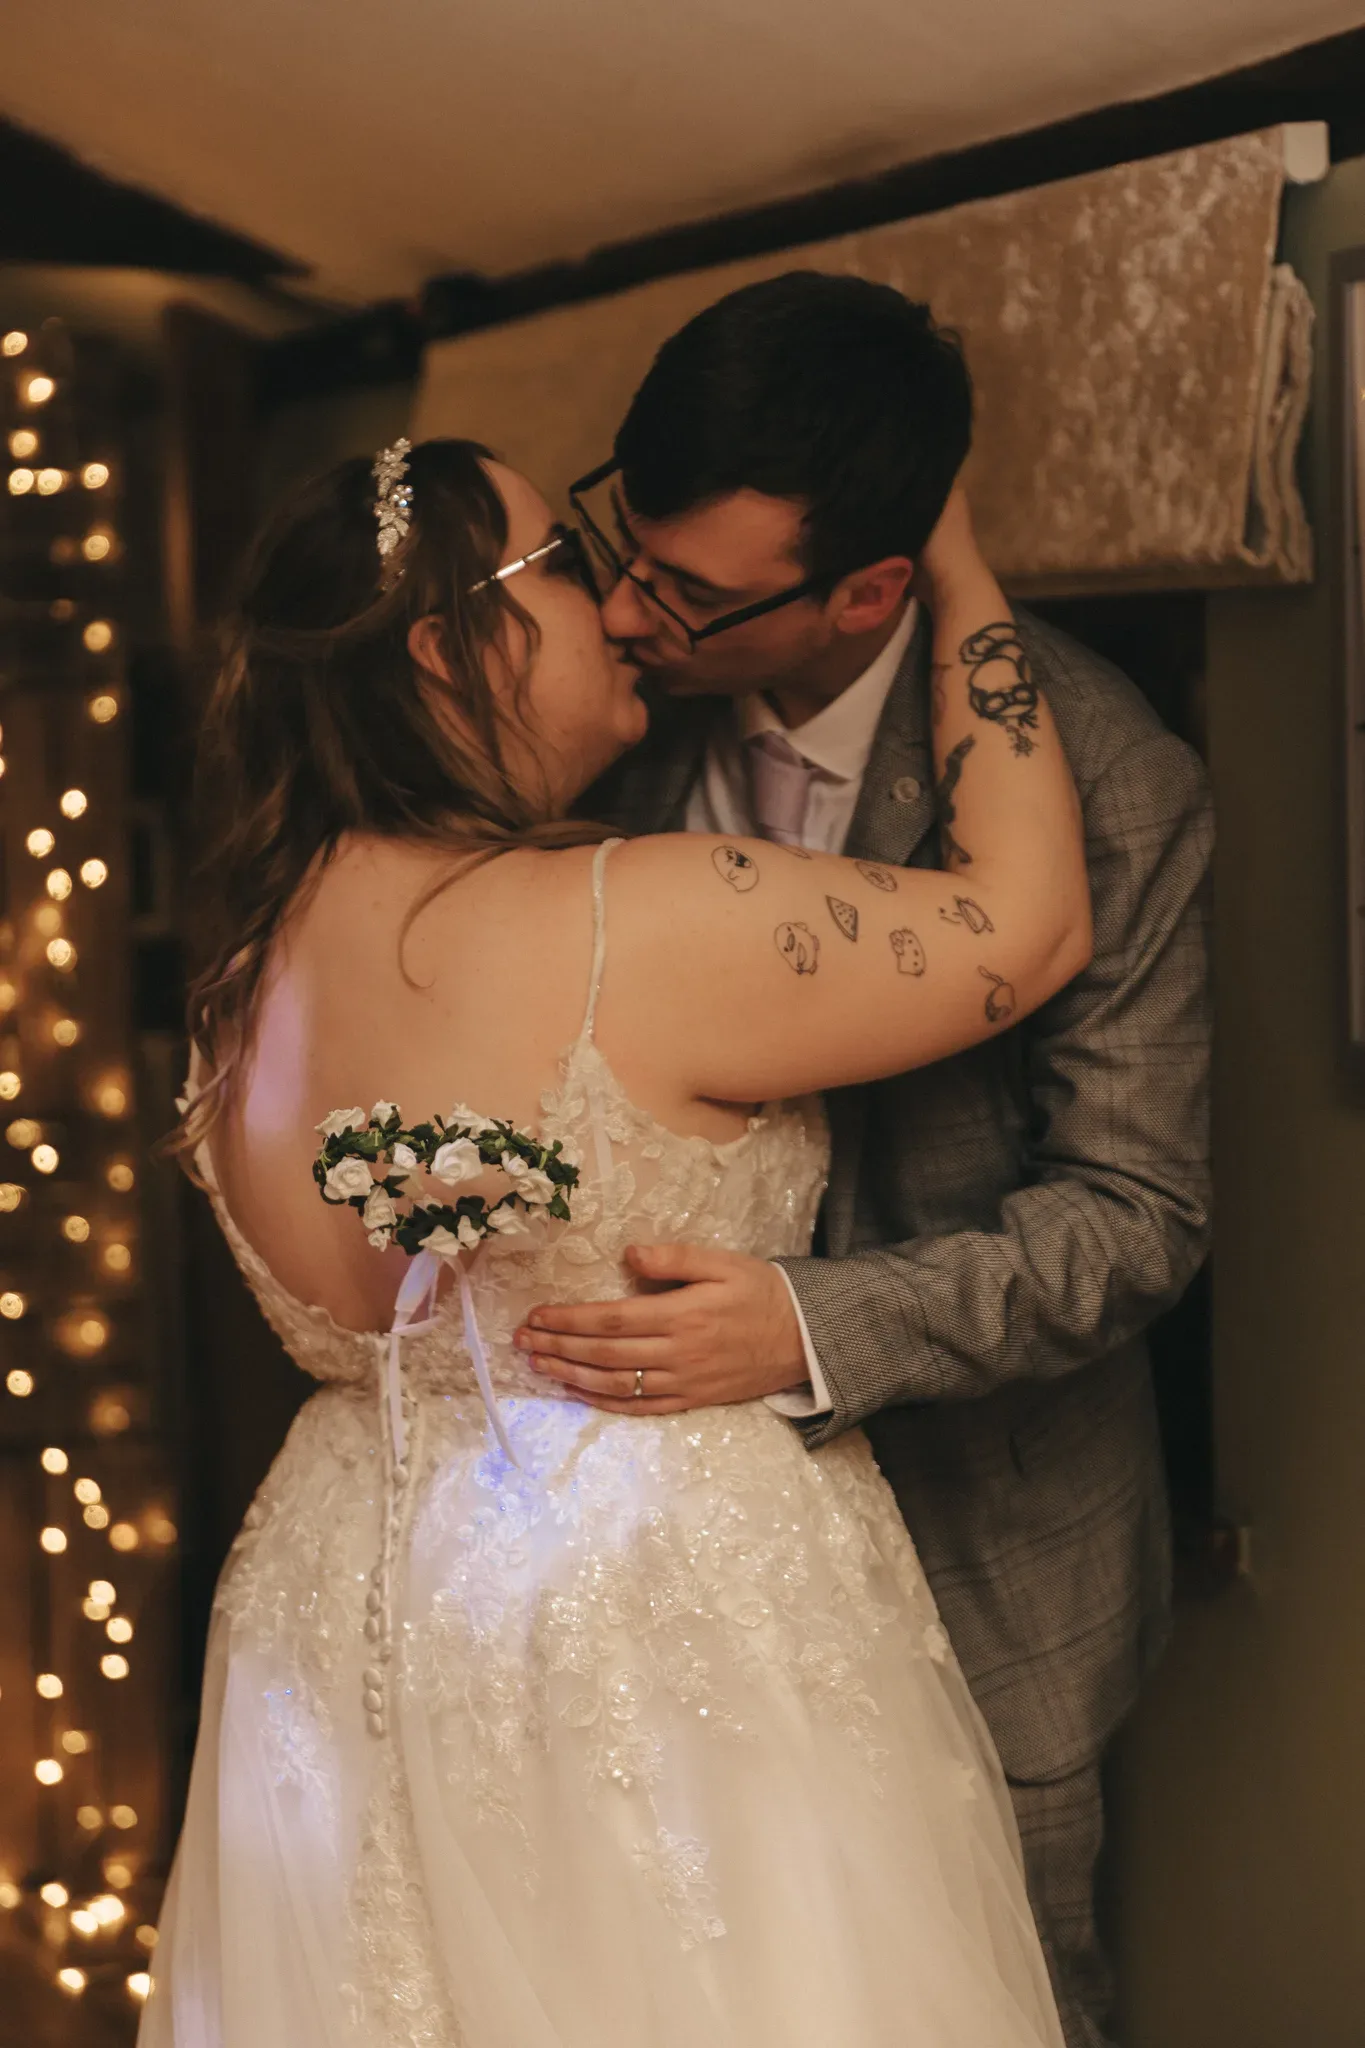 A couple in wedding attire shares an intimate embrace and kiss, surrounded by warm ambient lighting and delicate bokeh, symbolizing love and union.